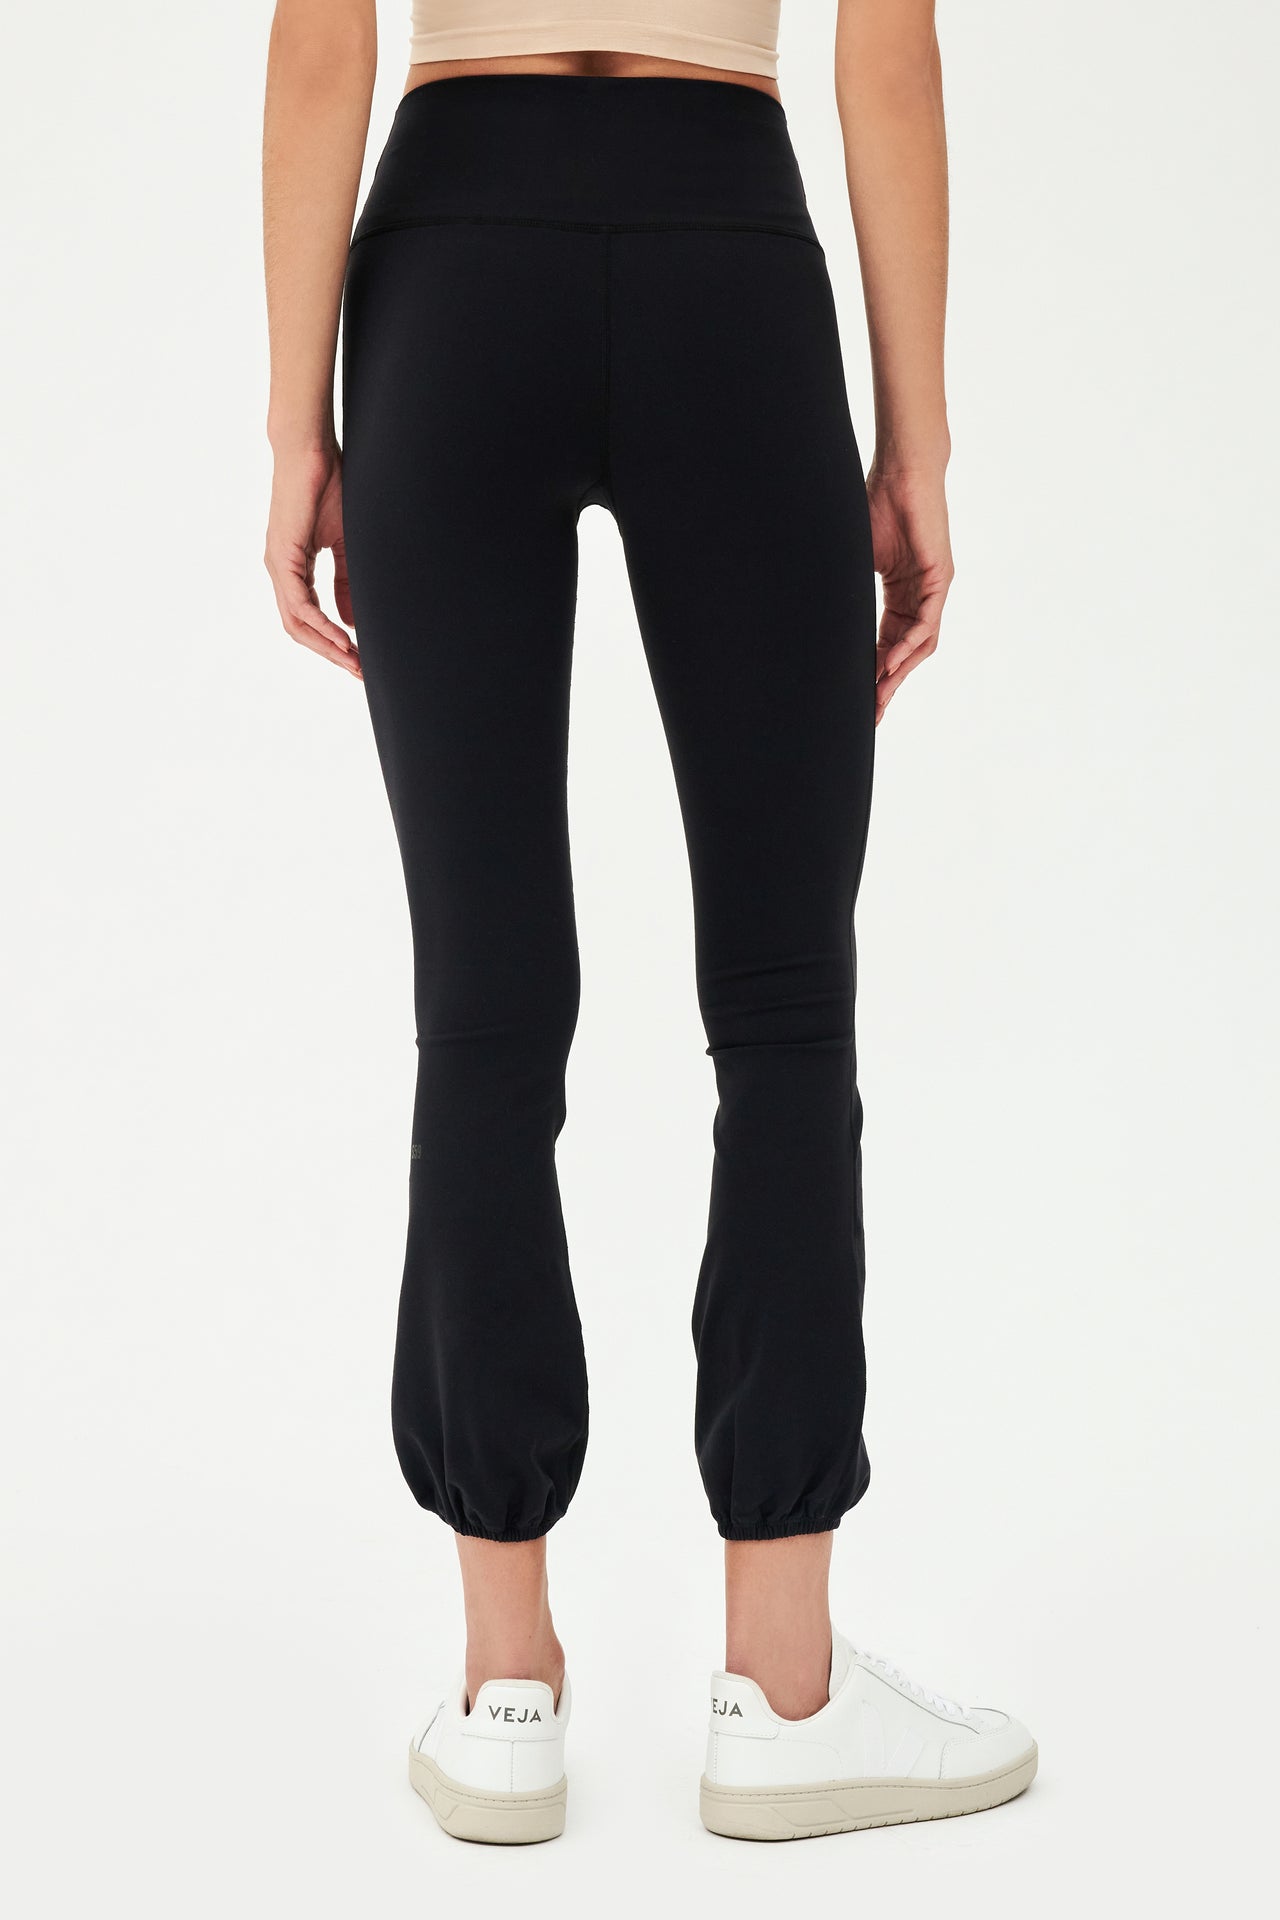 The back view of a woman wearing SPLITS59's Icon High Waist Supplex Legging in Black.